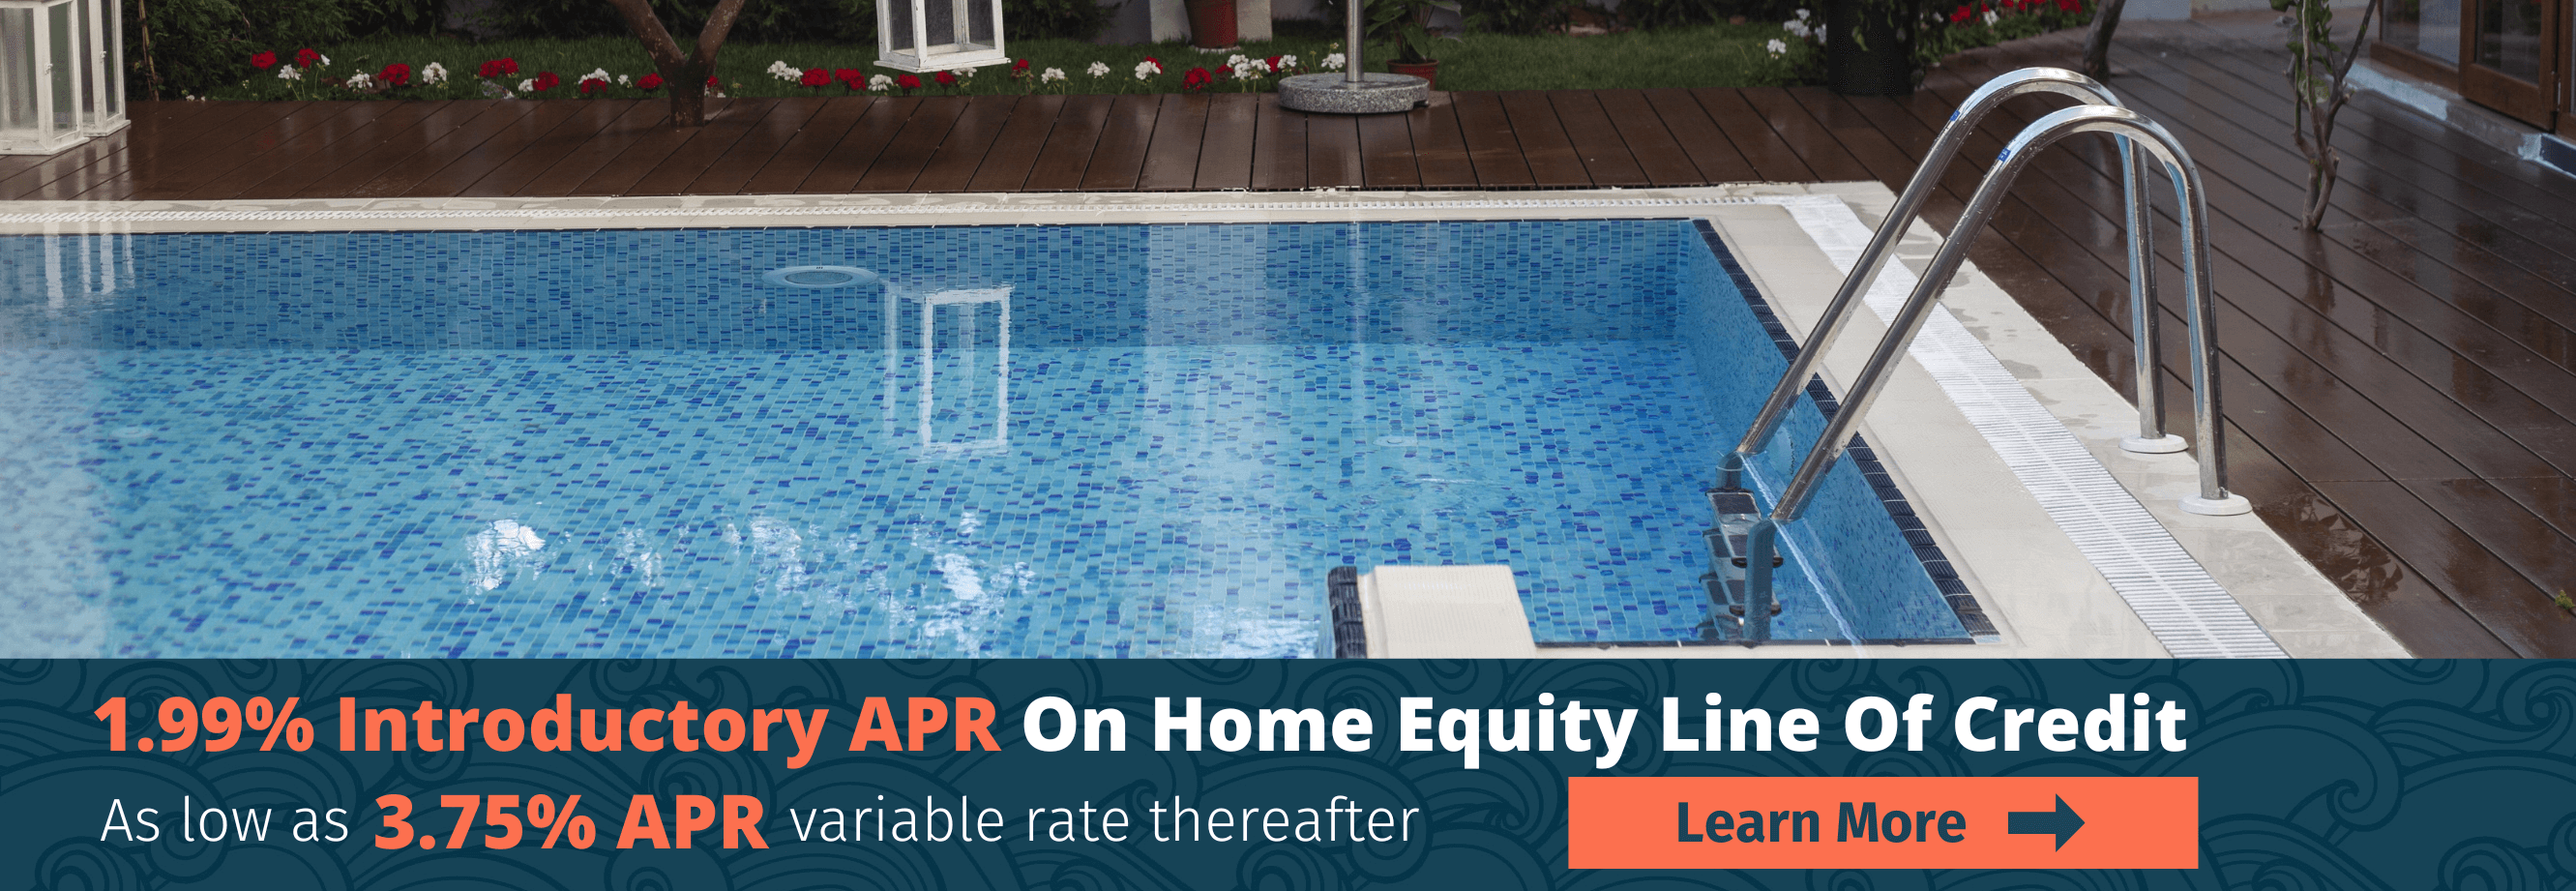 Home Equity Promotion